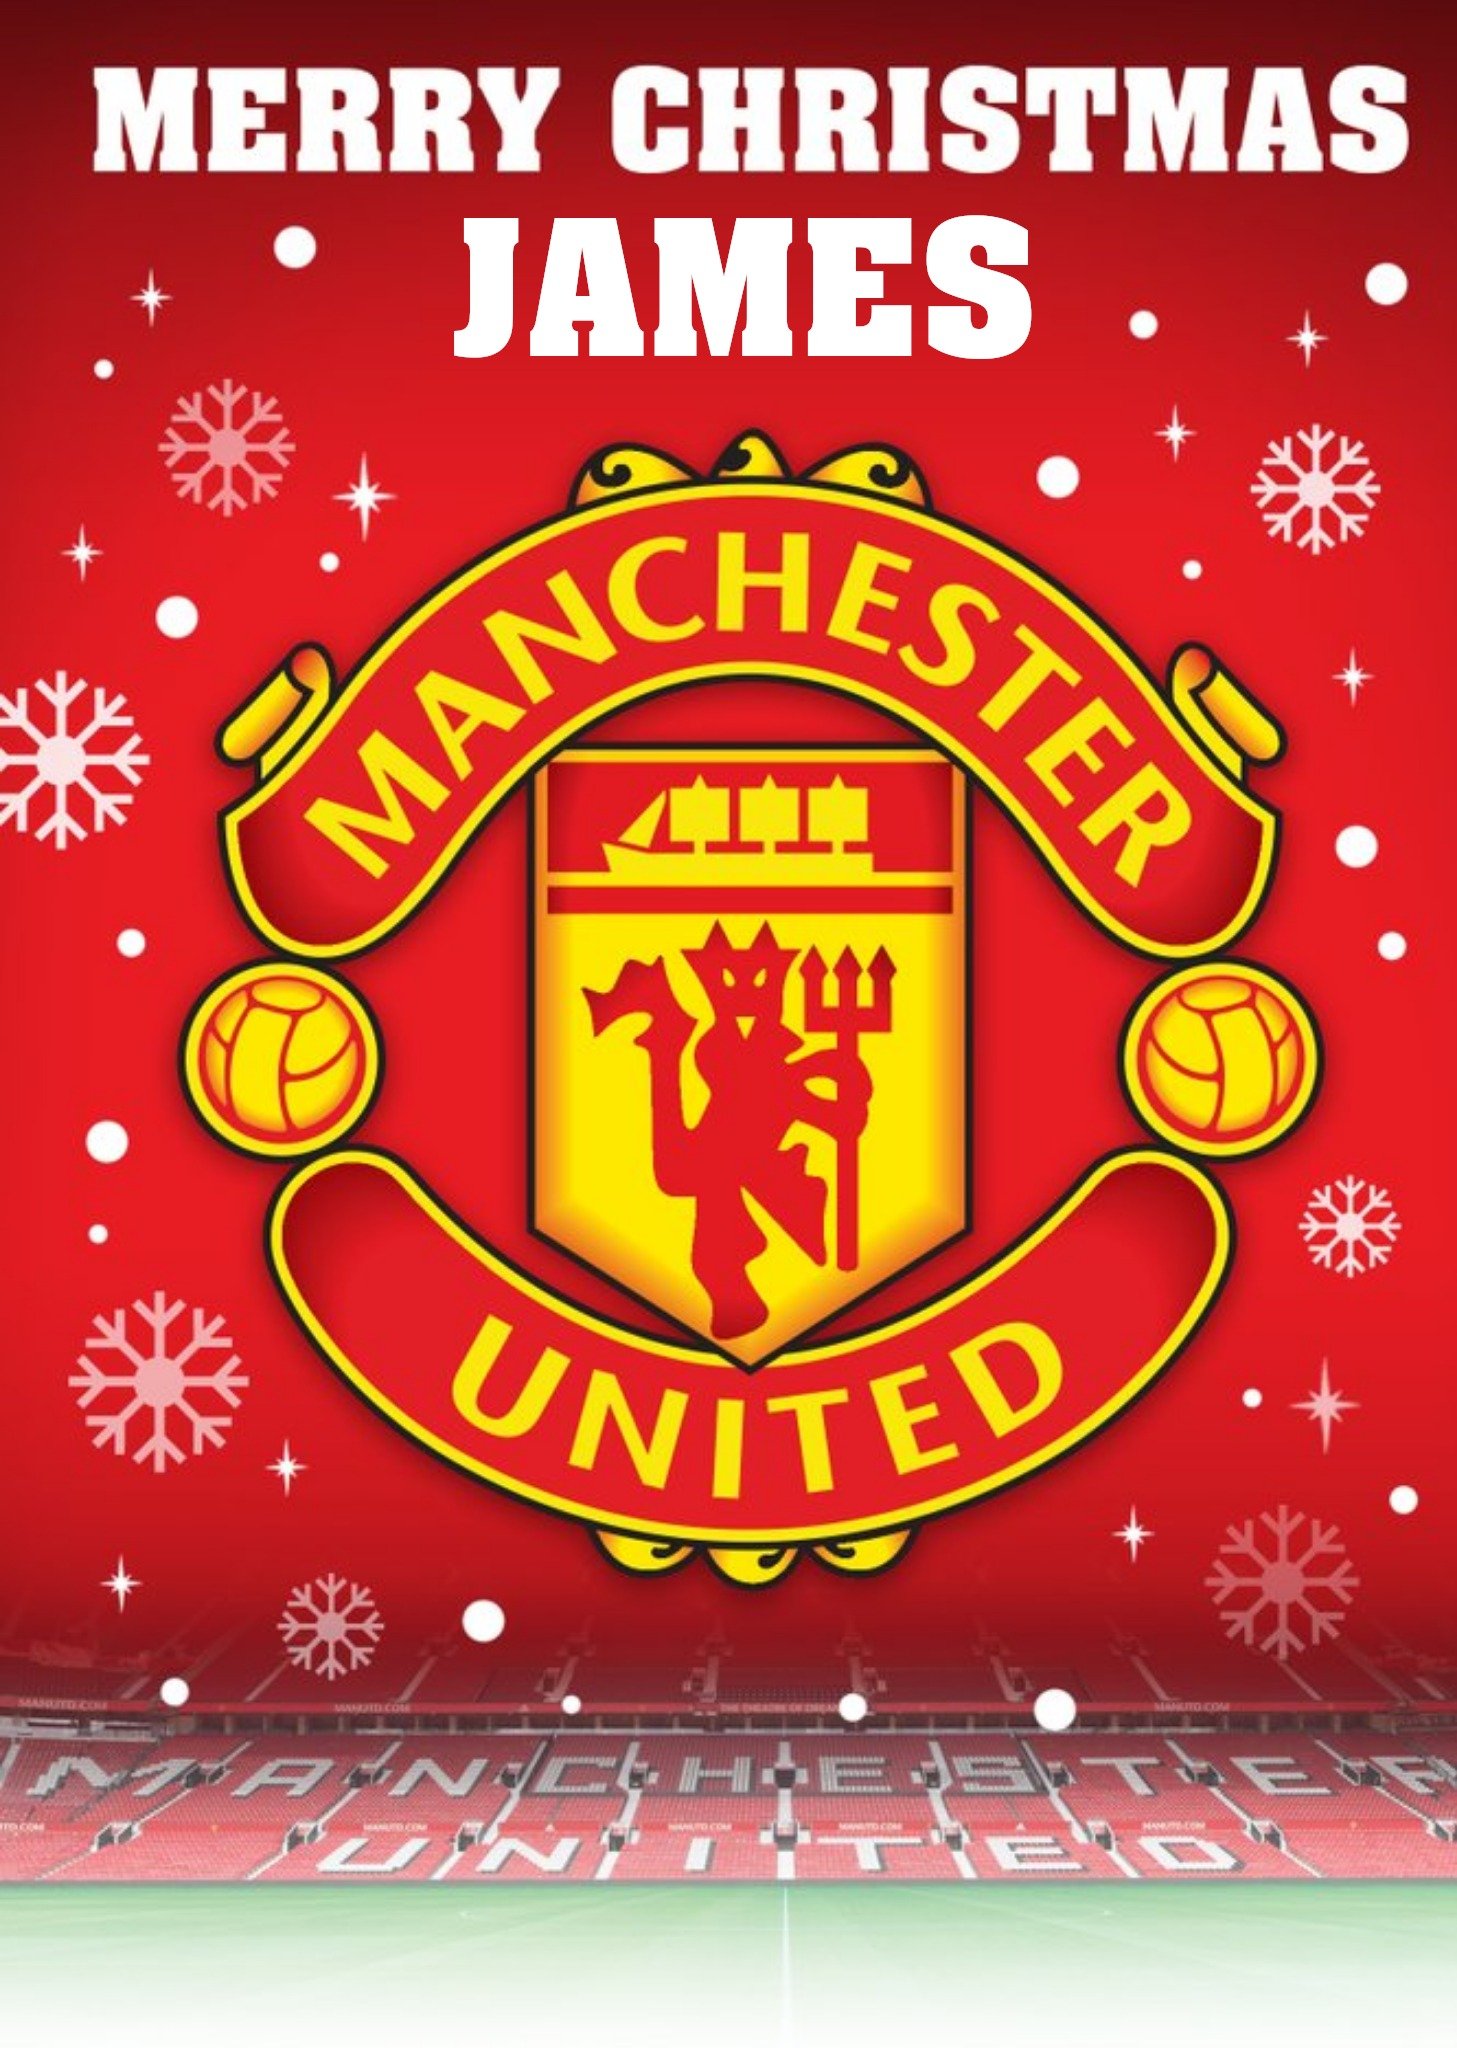 Manchester United Fc Football Club Christmas Card, Large